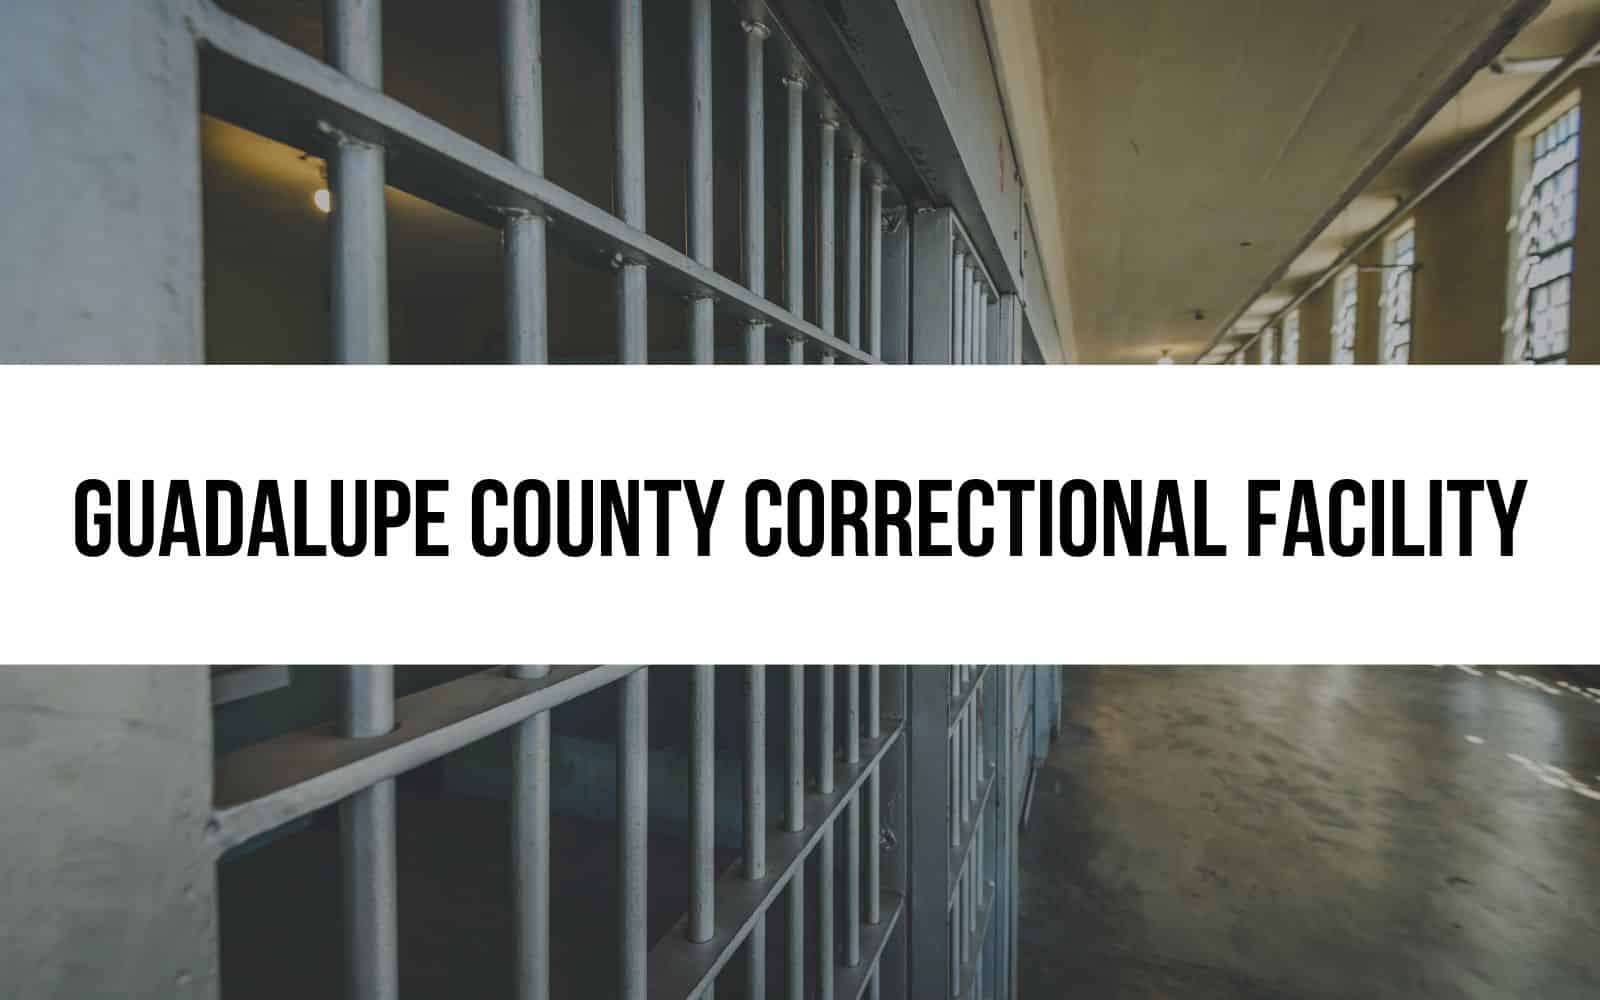 Guadalupe County Correctional Facility